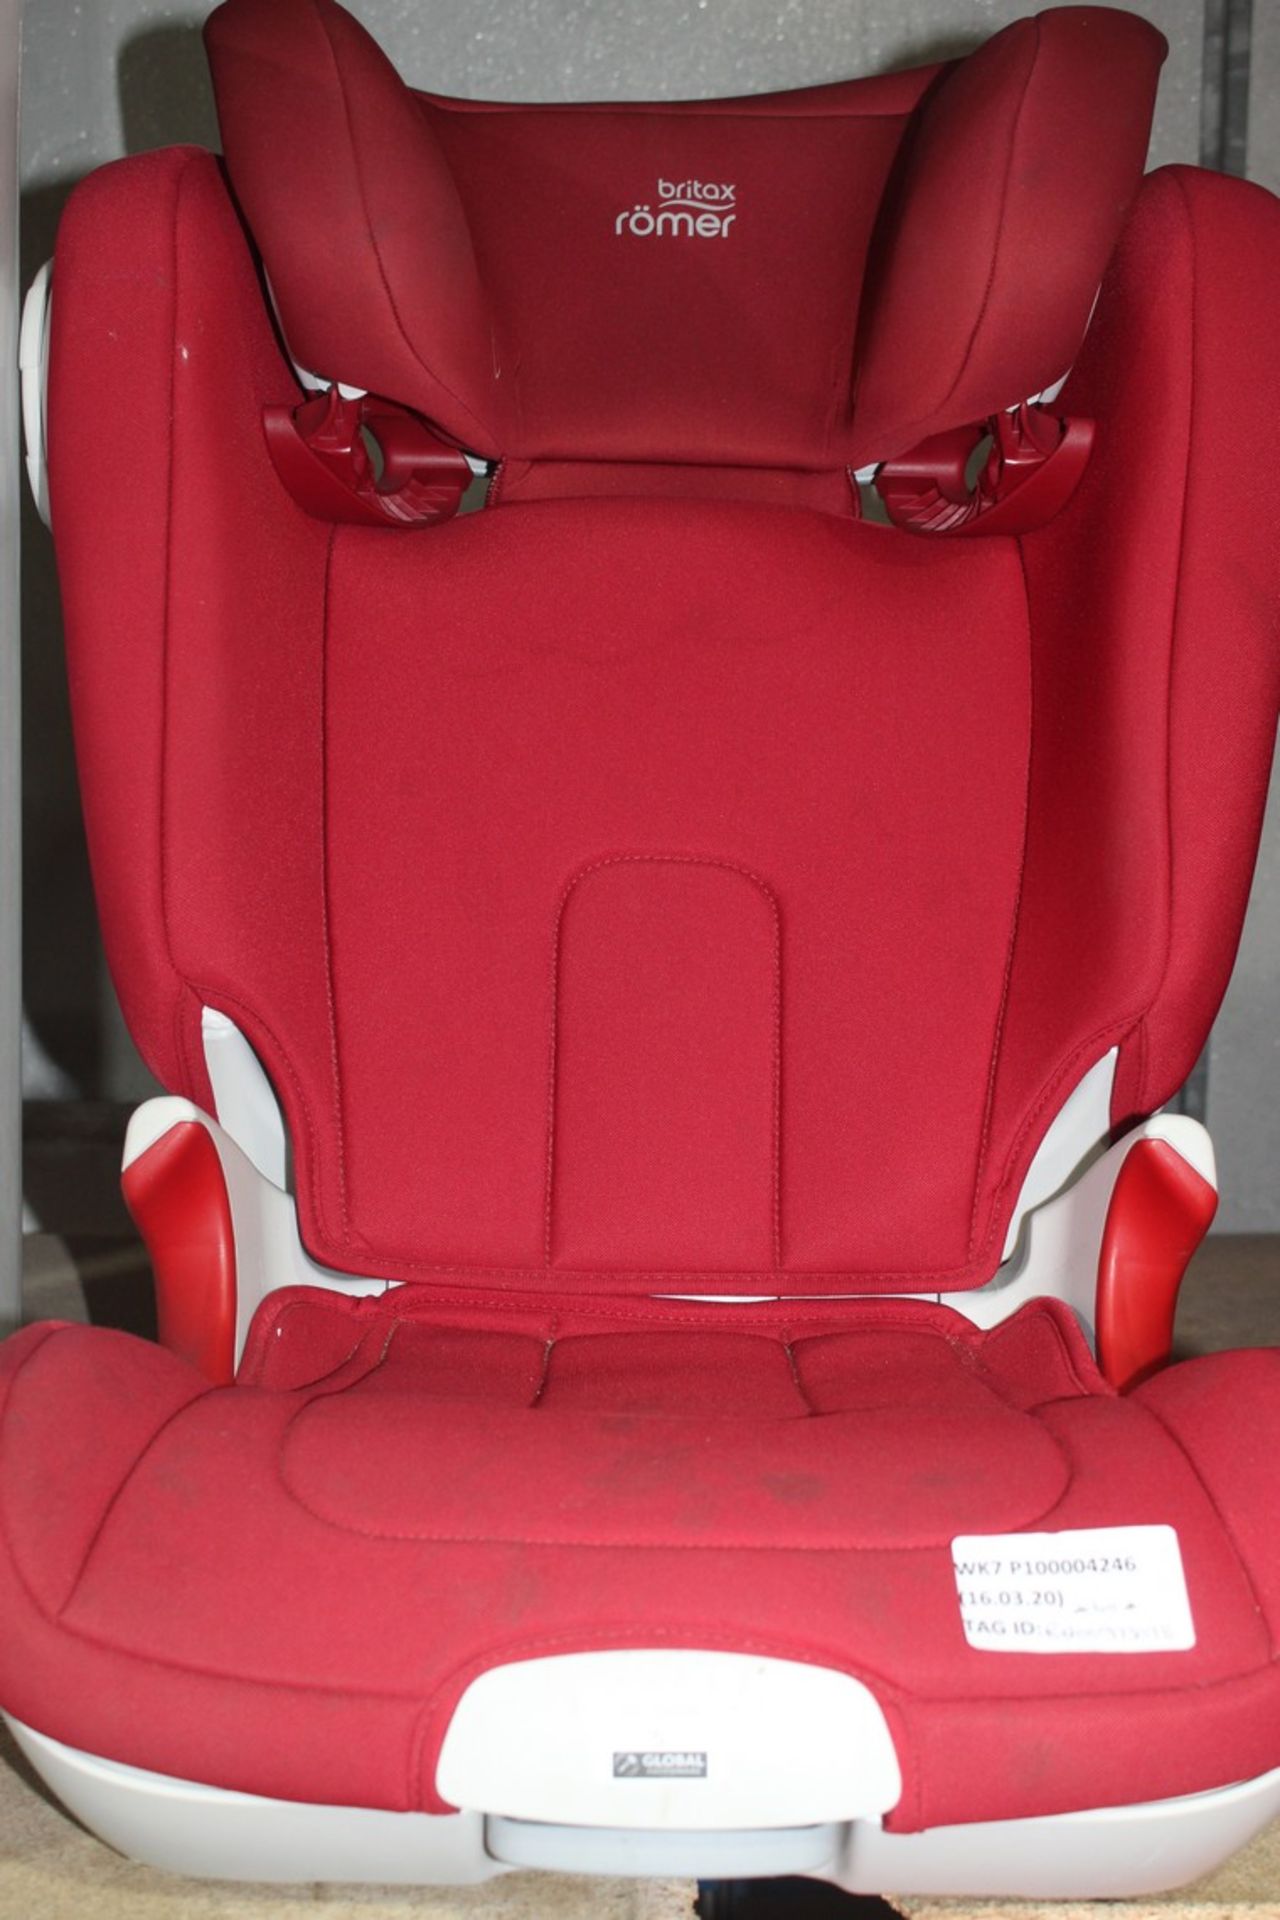 Brittax Roma In Car Kids Safety Seat RRP £60 (RET00973778) (Appraisals Available)